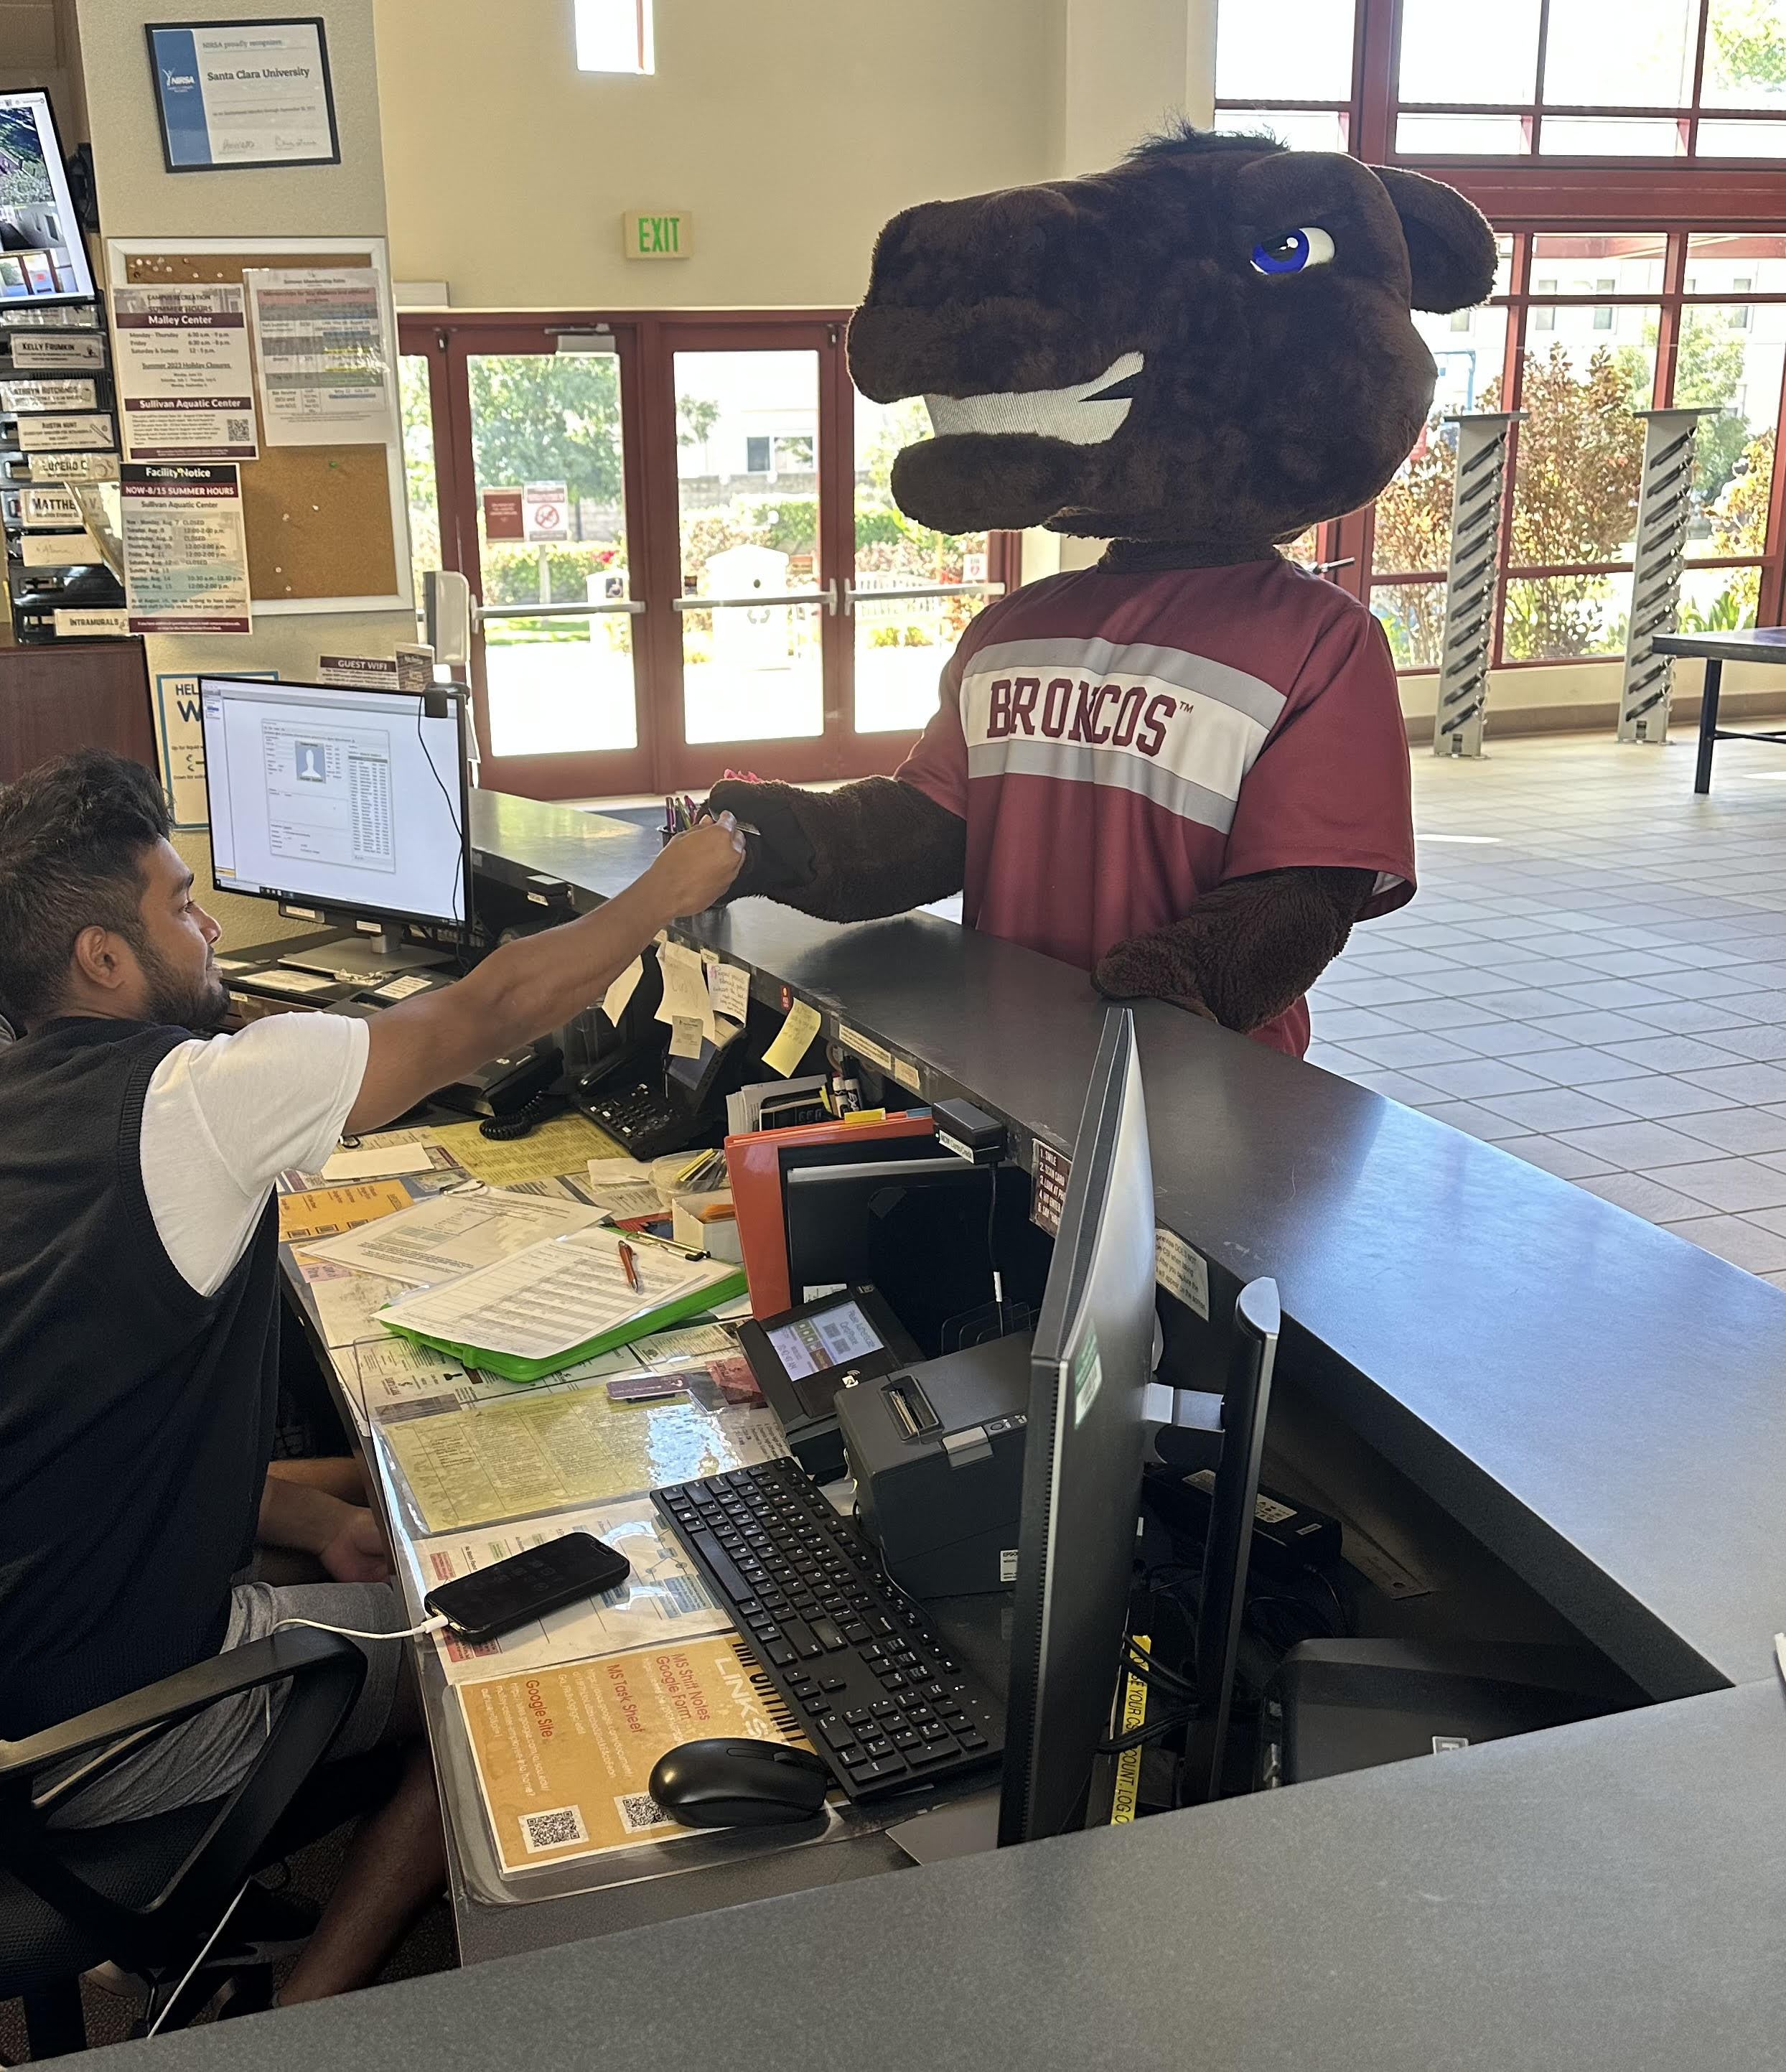 image of Bucky the mascot checking in to use the Malley Center